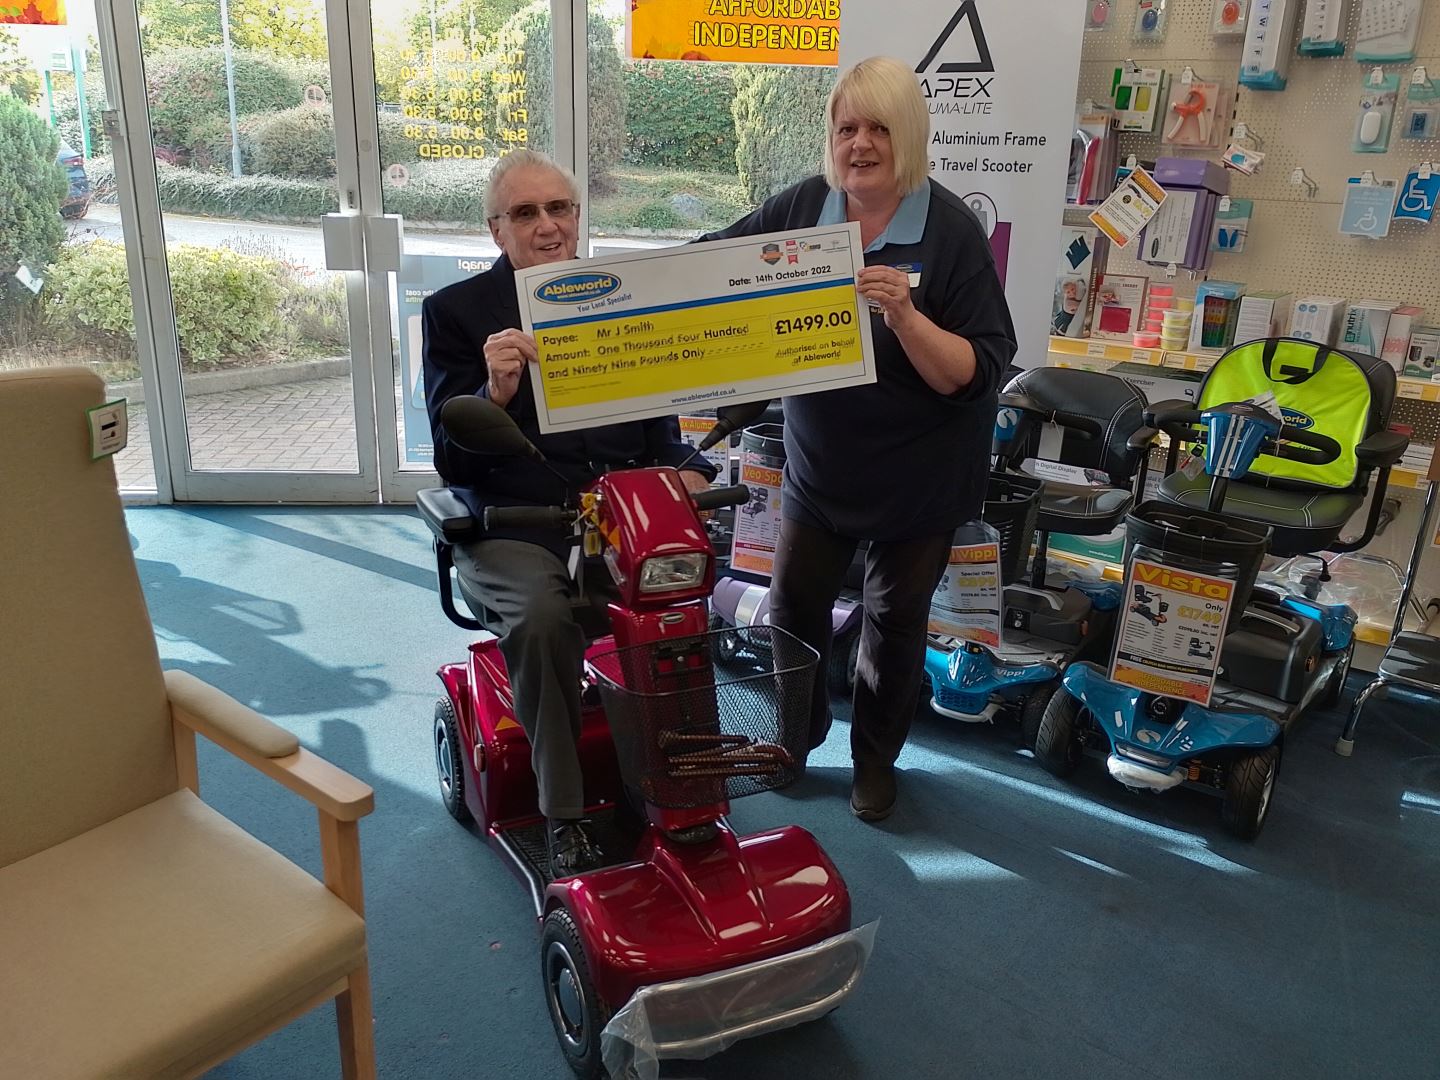 Ableworld Burton customer wins back the cost of Scooter